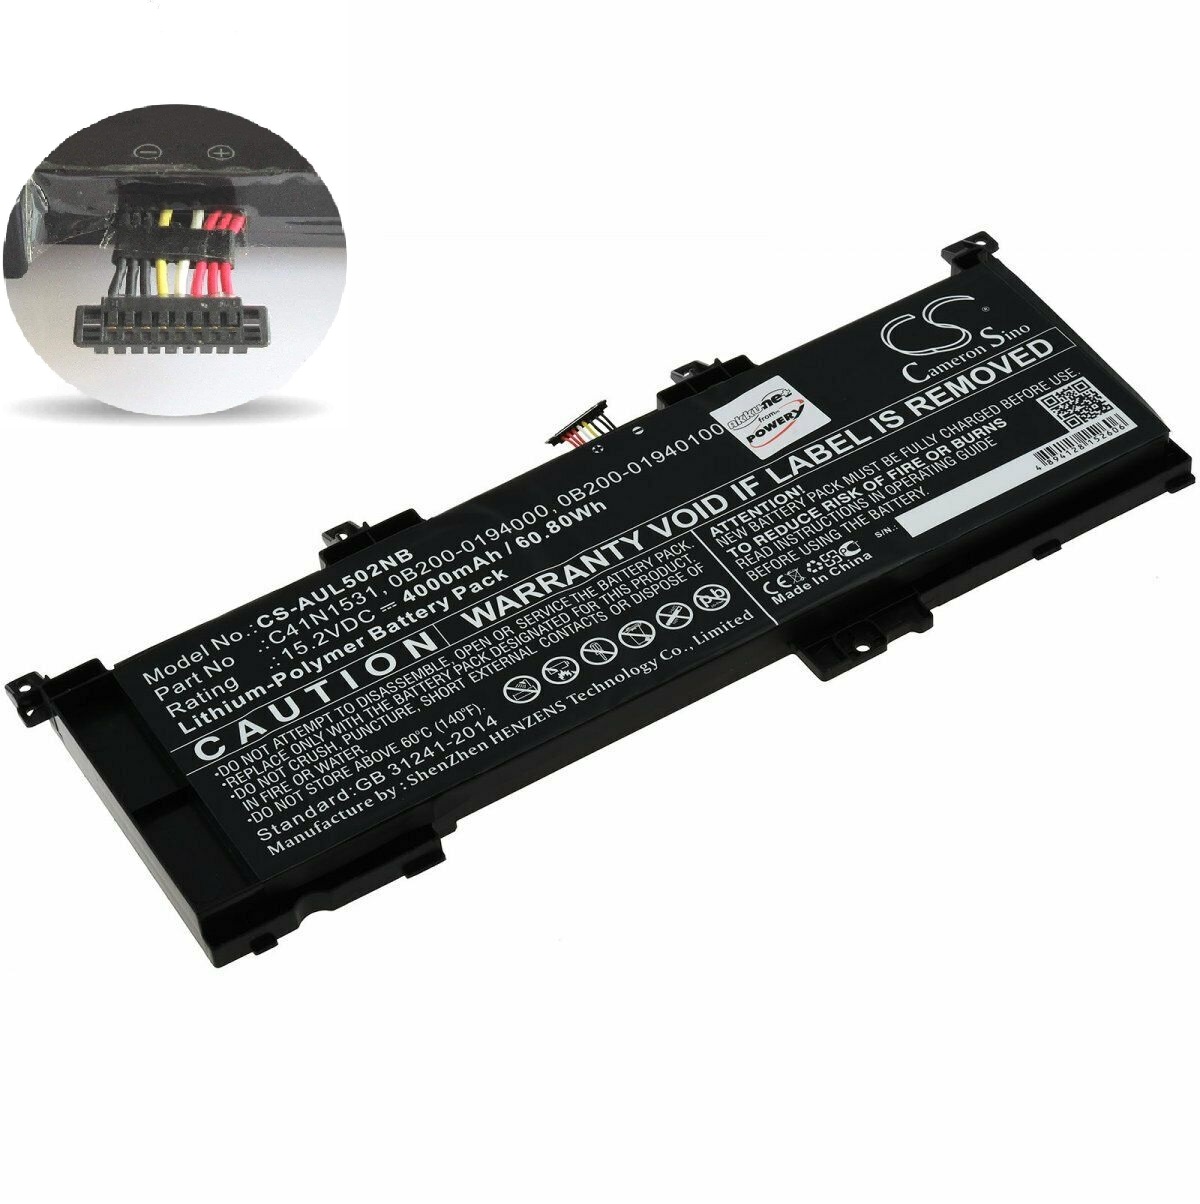 C41N1531 0B200-01940100 Asus GL502VS-1A GL502VS-1E GL502VT-1B GL502VY GL502VY-1A compatible battery